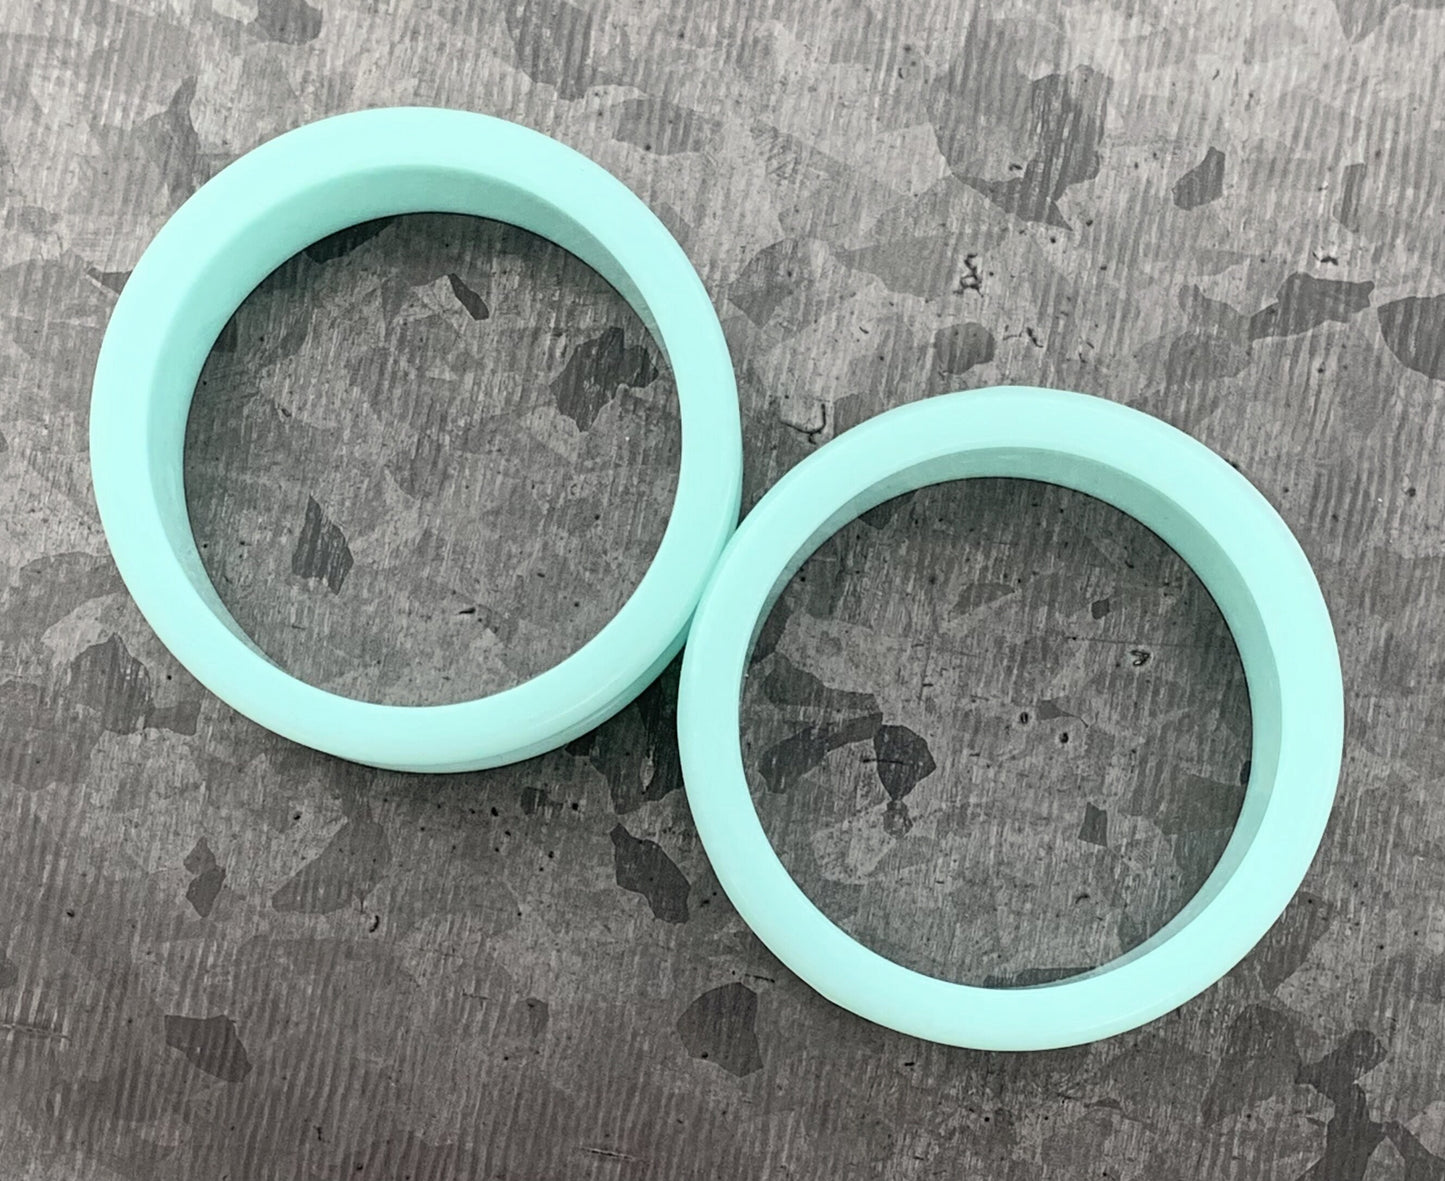 PAIR of Unique Teal Silicone Double Flare Tunnels - Gauges 2g (6mm) up to 2" (51mm) available!